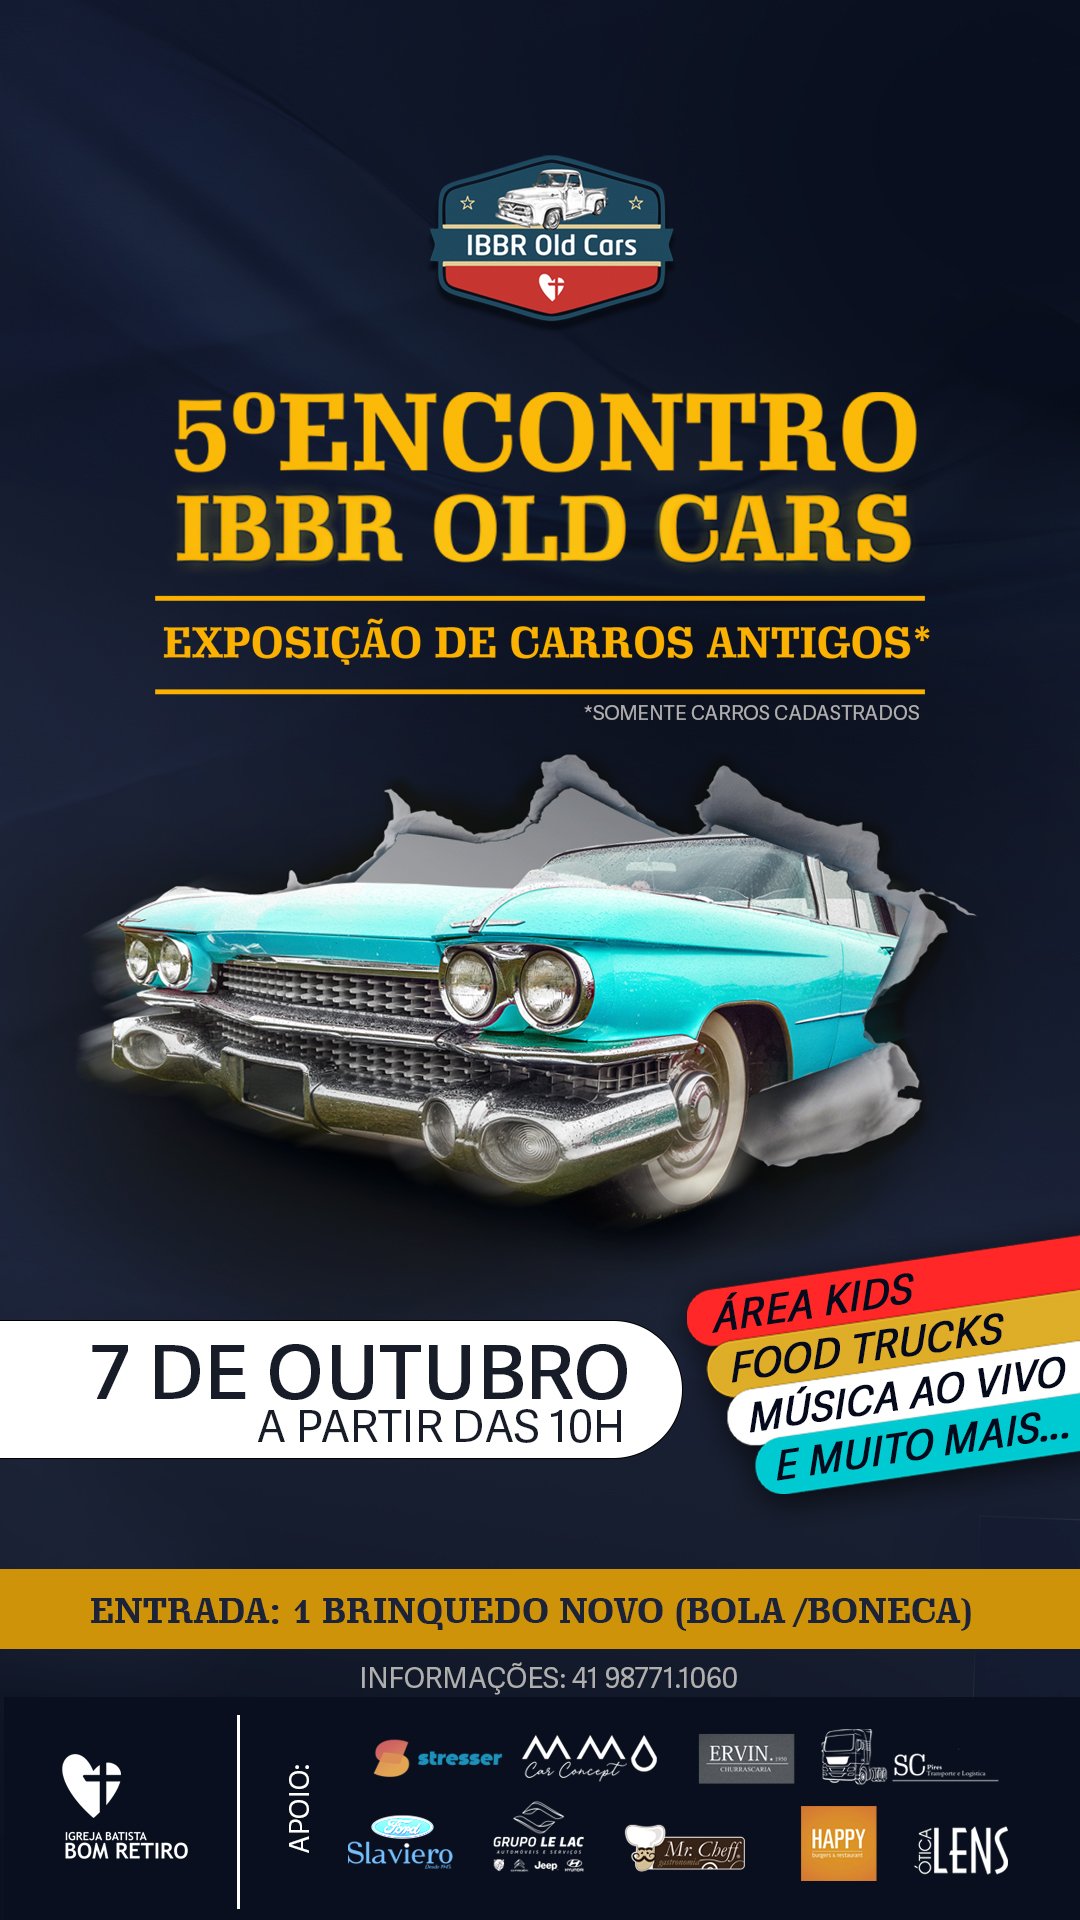 OLD CARS